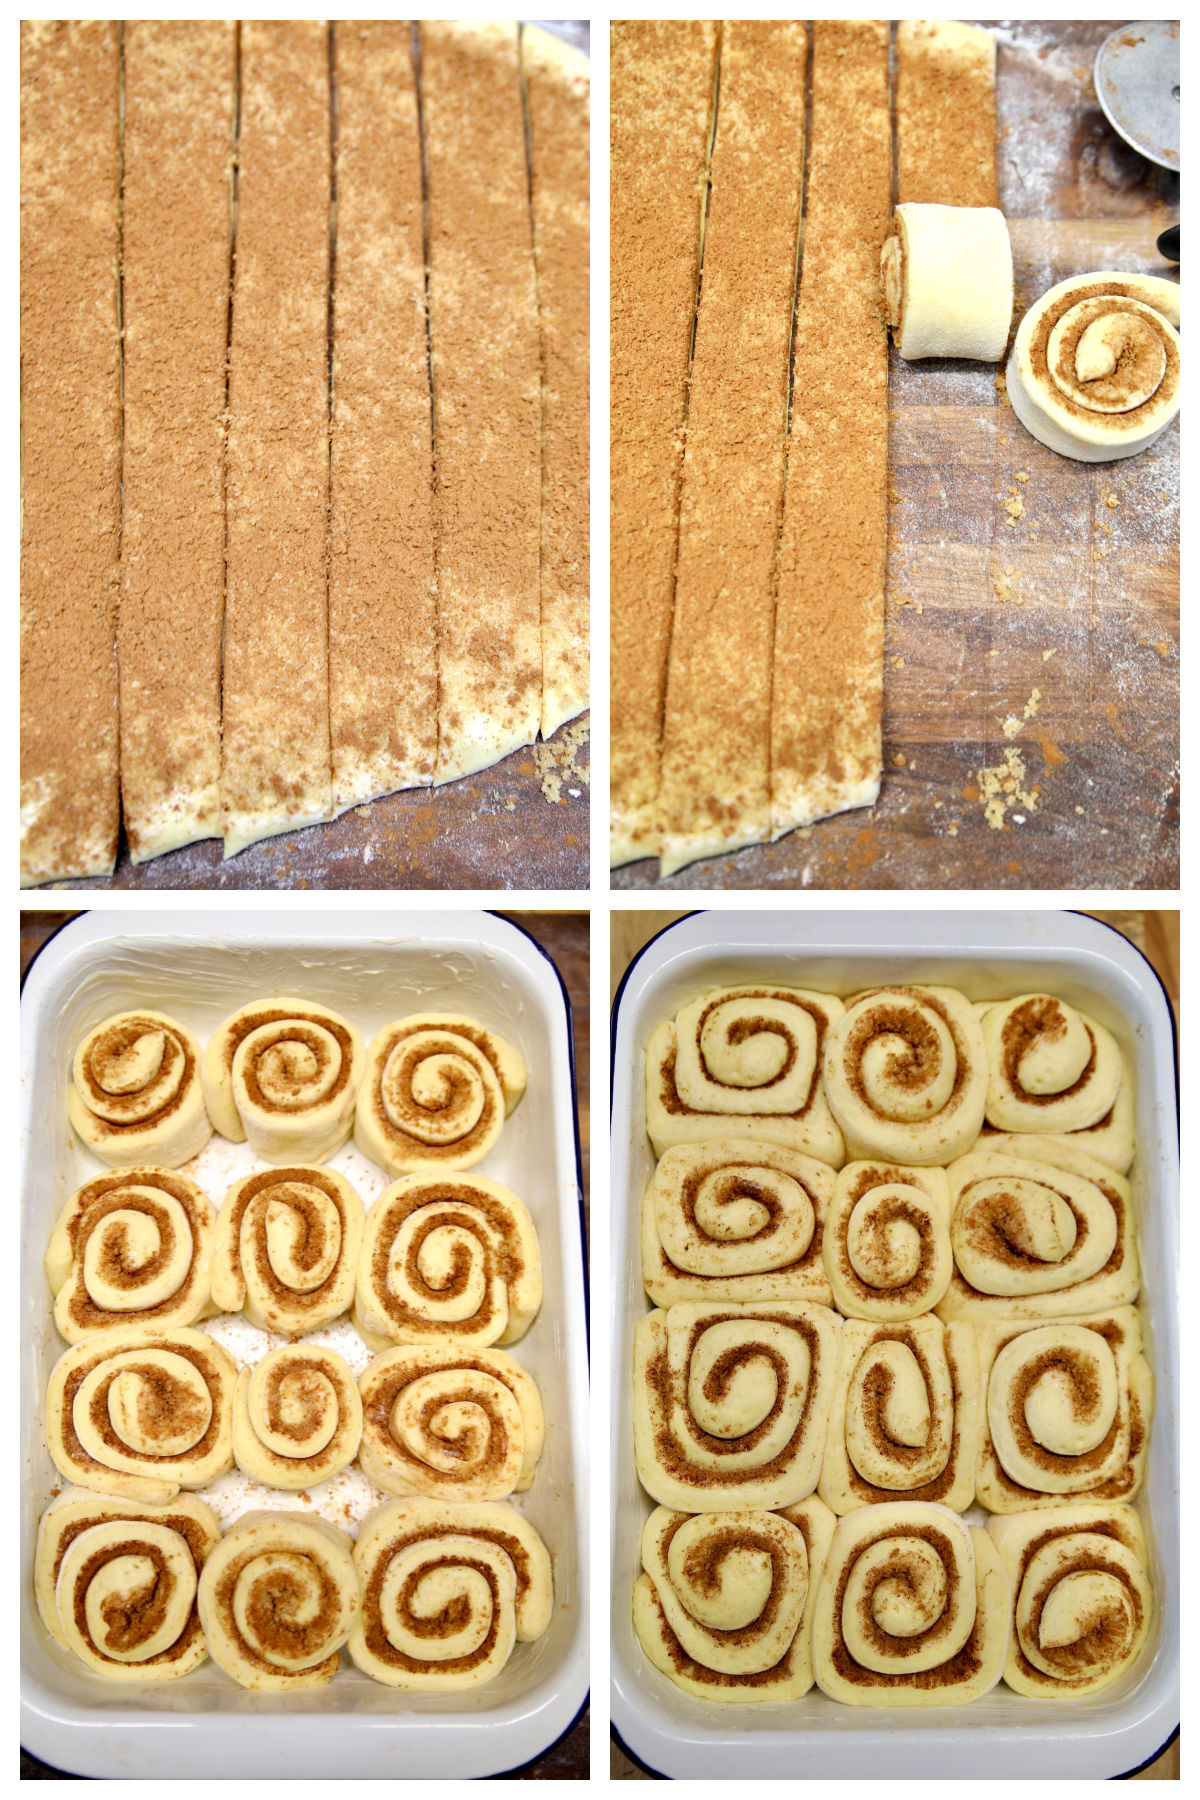 Cutting and rolling up cinnamon rolls, rising in pan.